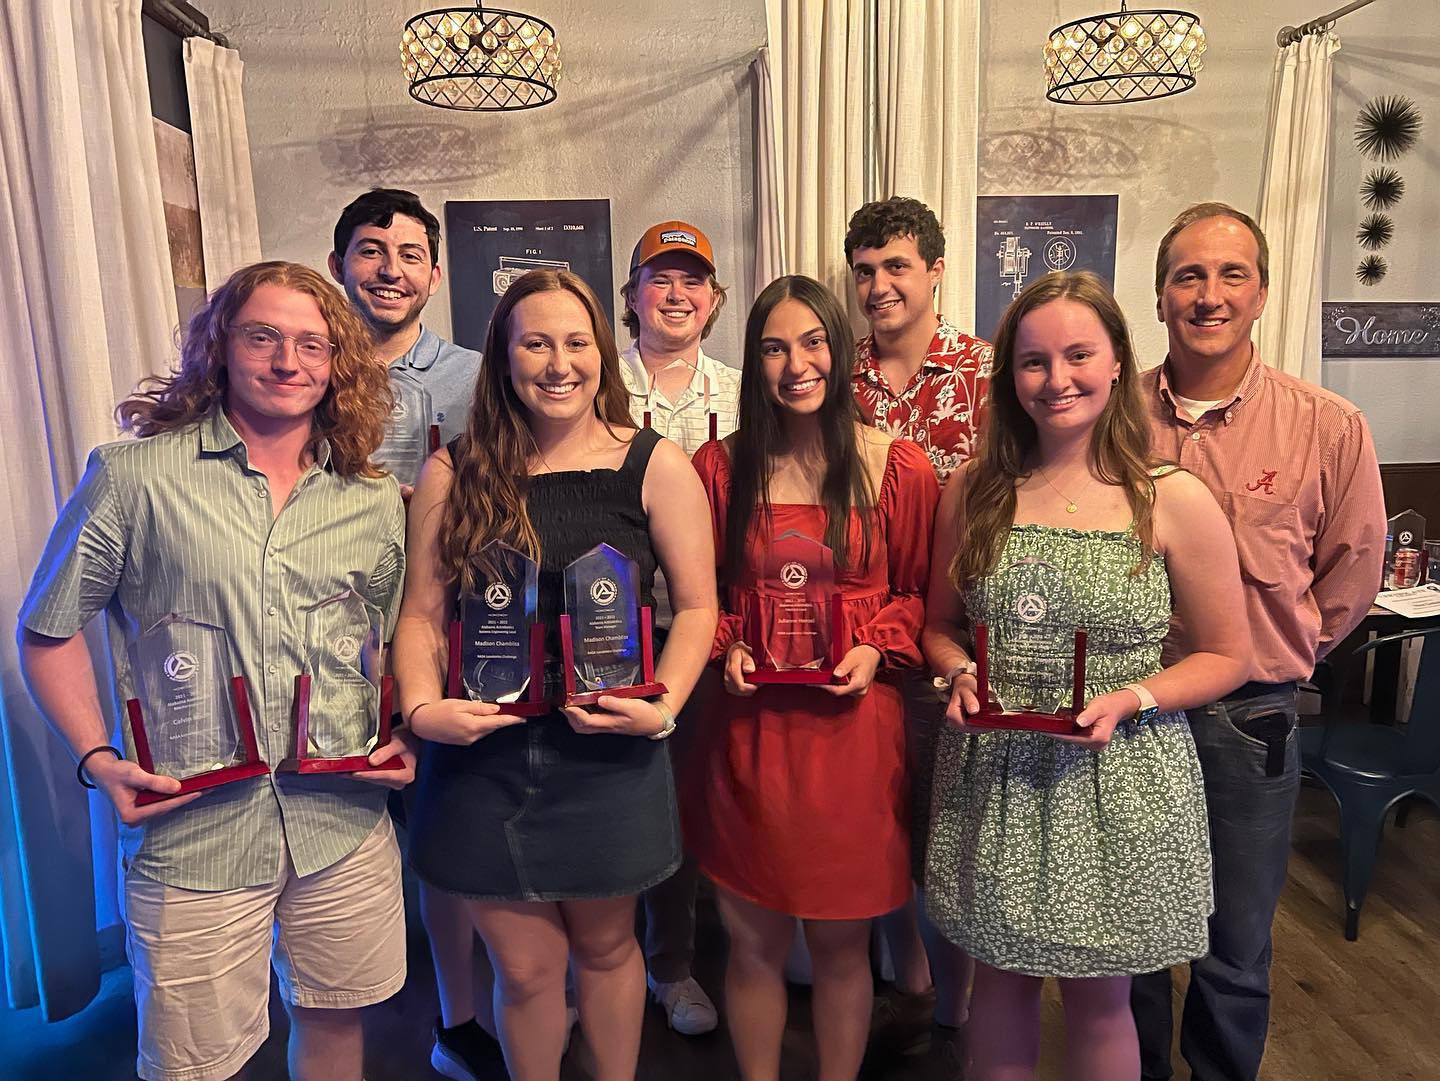 A group of people, some holding clear awards, pose for a photo in a restaurant.